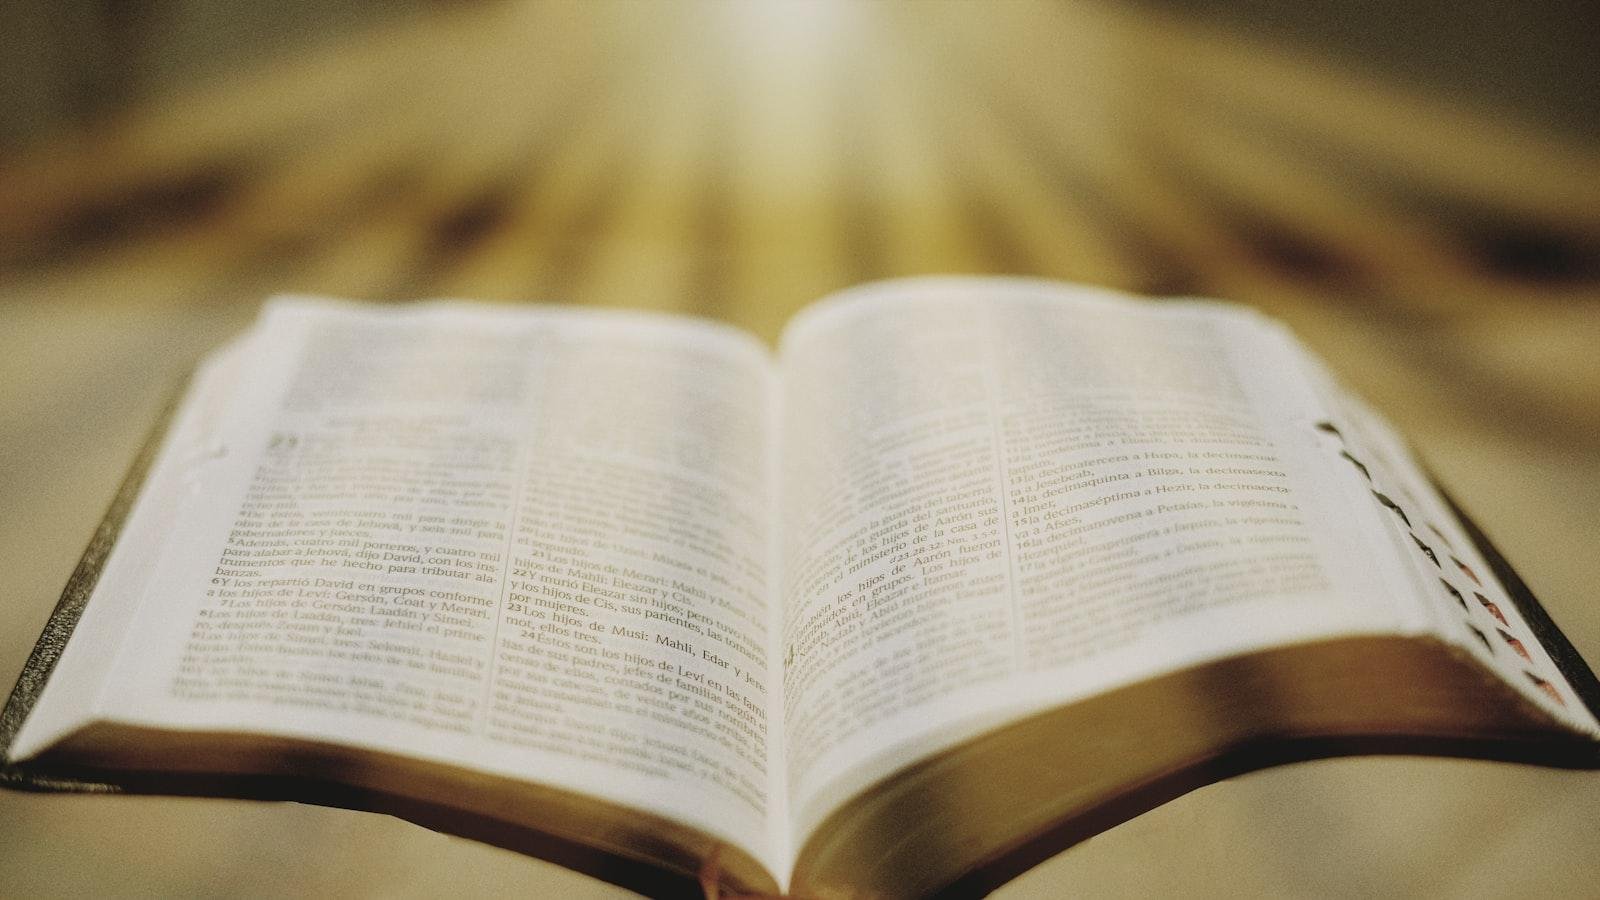 Navigating contradictions and interpretations in the Bible